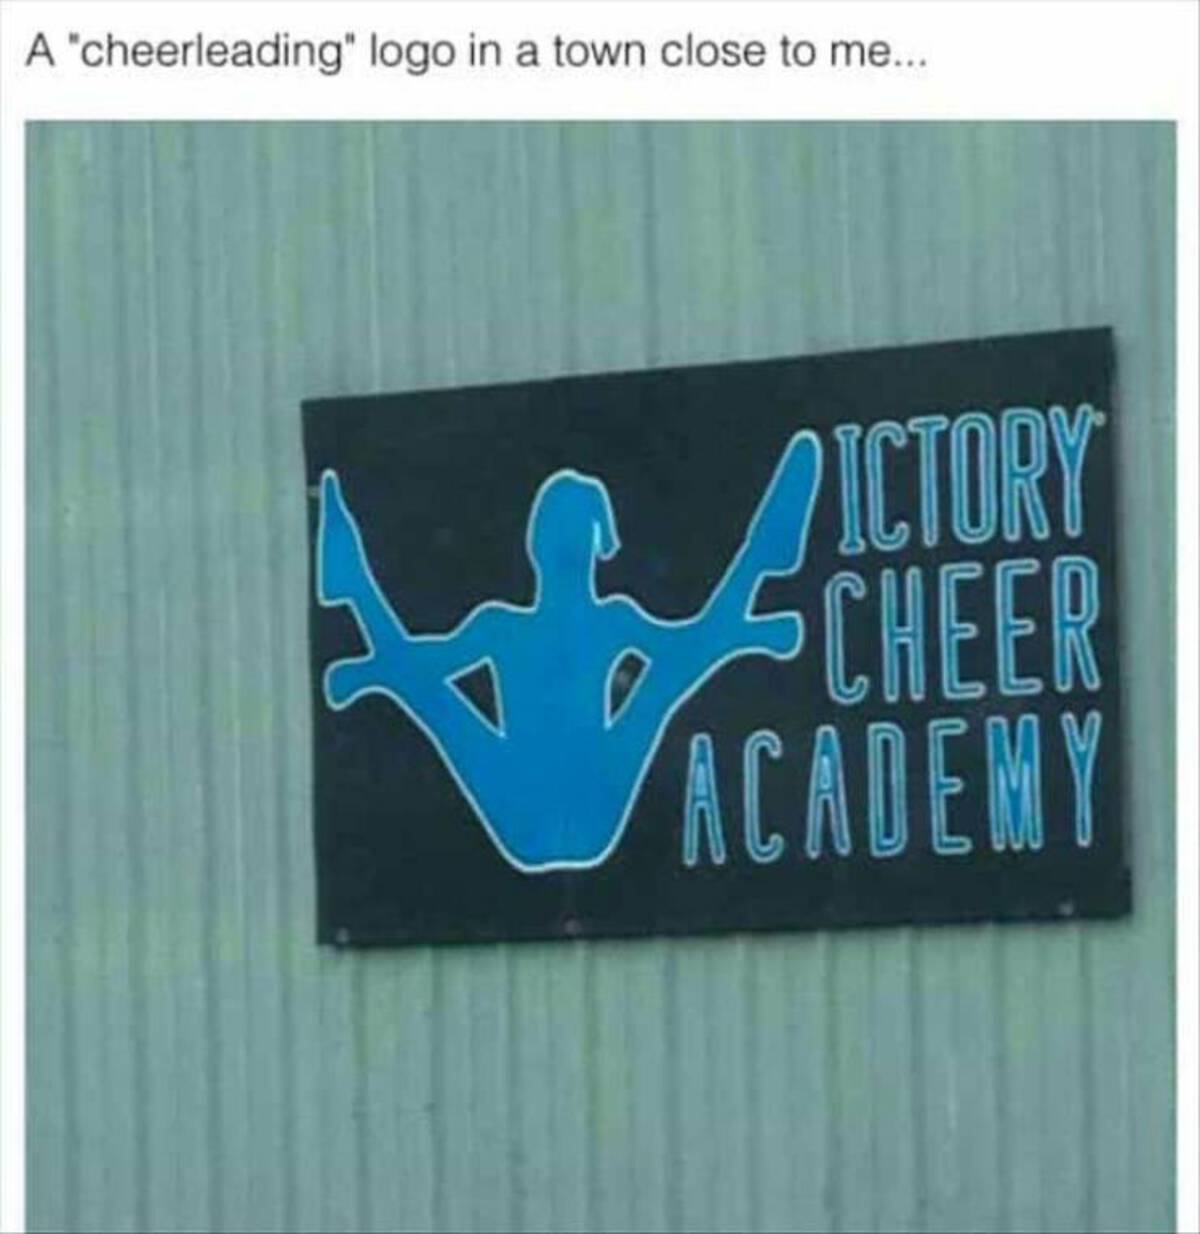 sign - A "cheerleading" logo in a town close to me... Ictory Scheer Academy